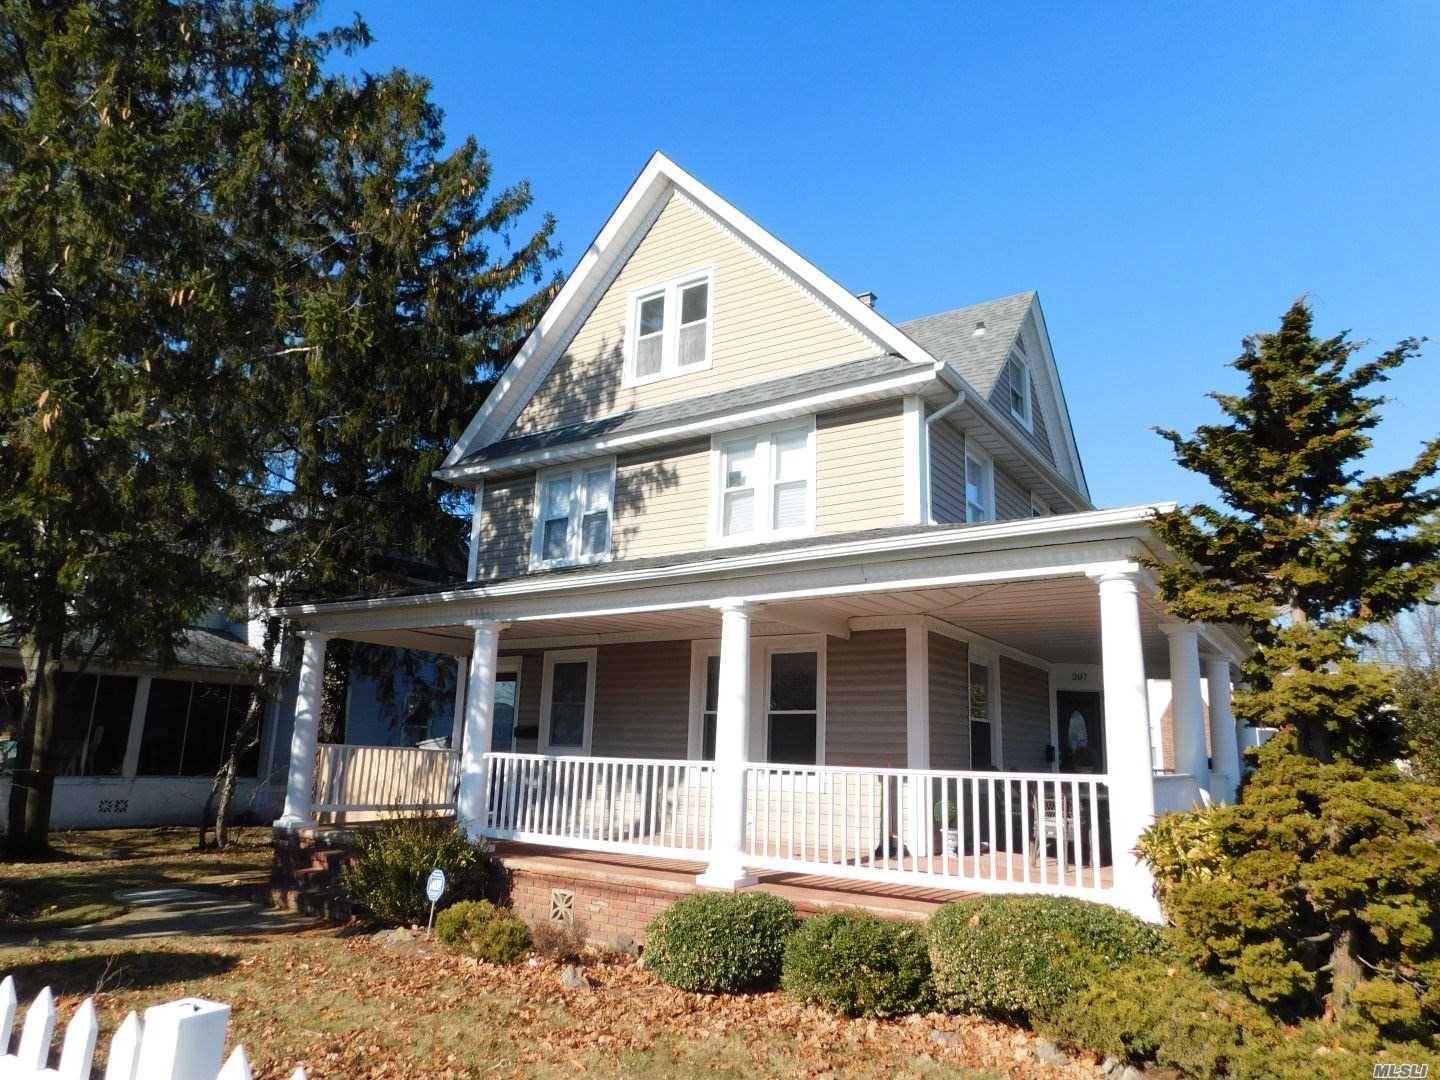 Renovated 3 Story Colonial With New Kitchen And Bathrooms.